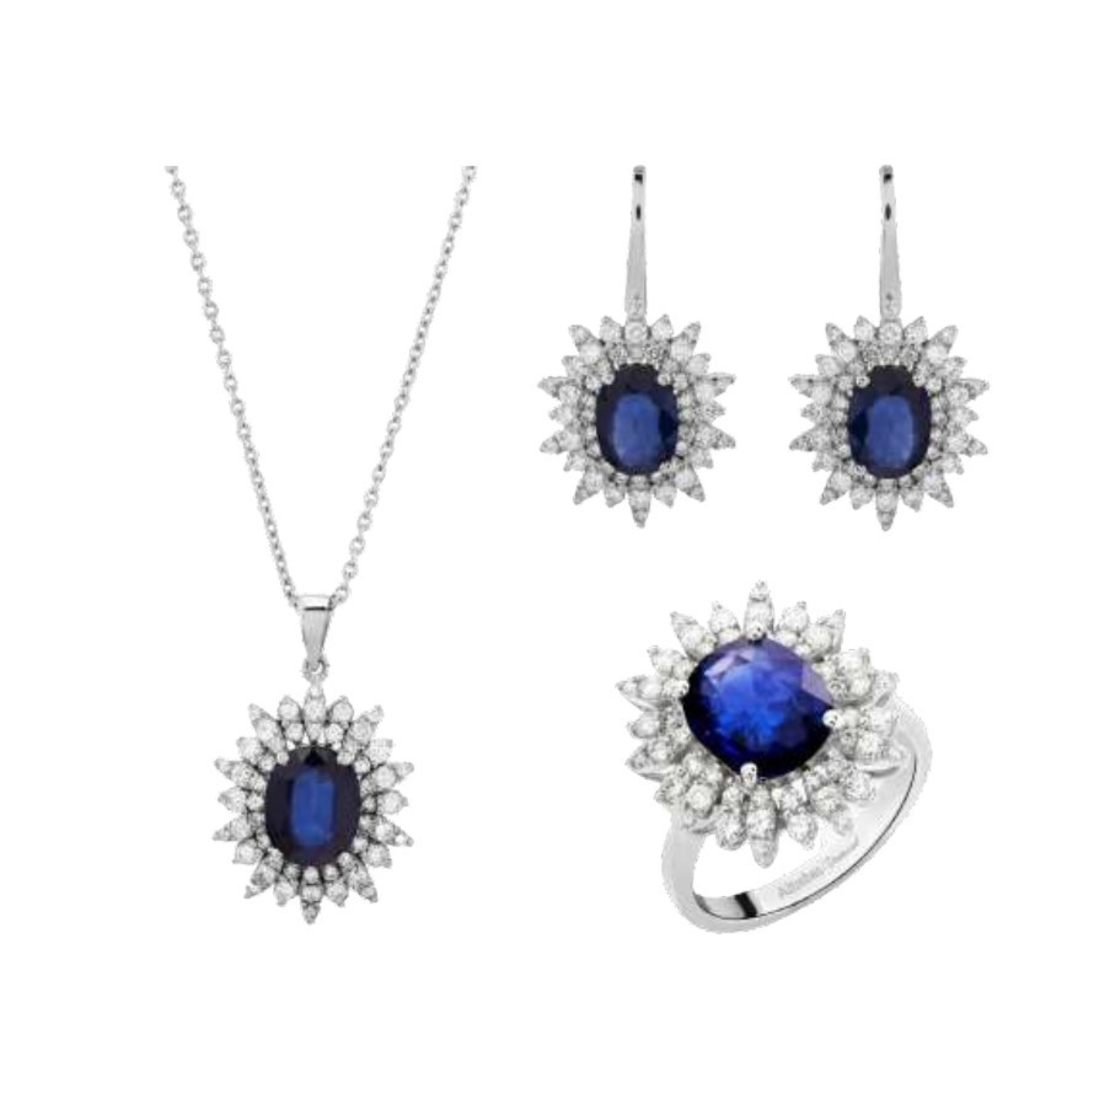 9.92 k Set with sapphires and diamonds